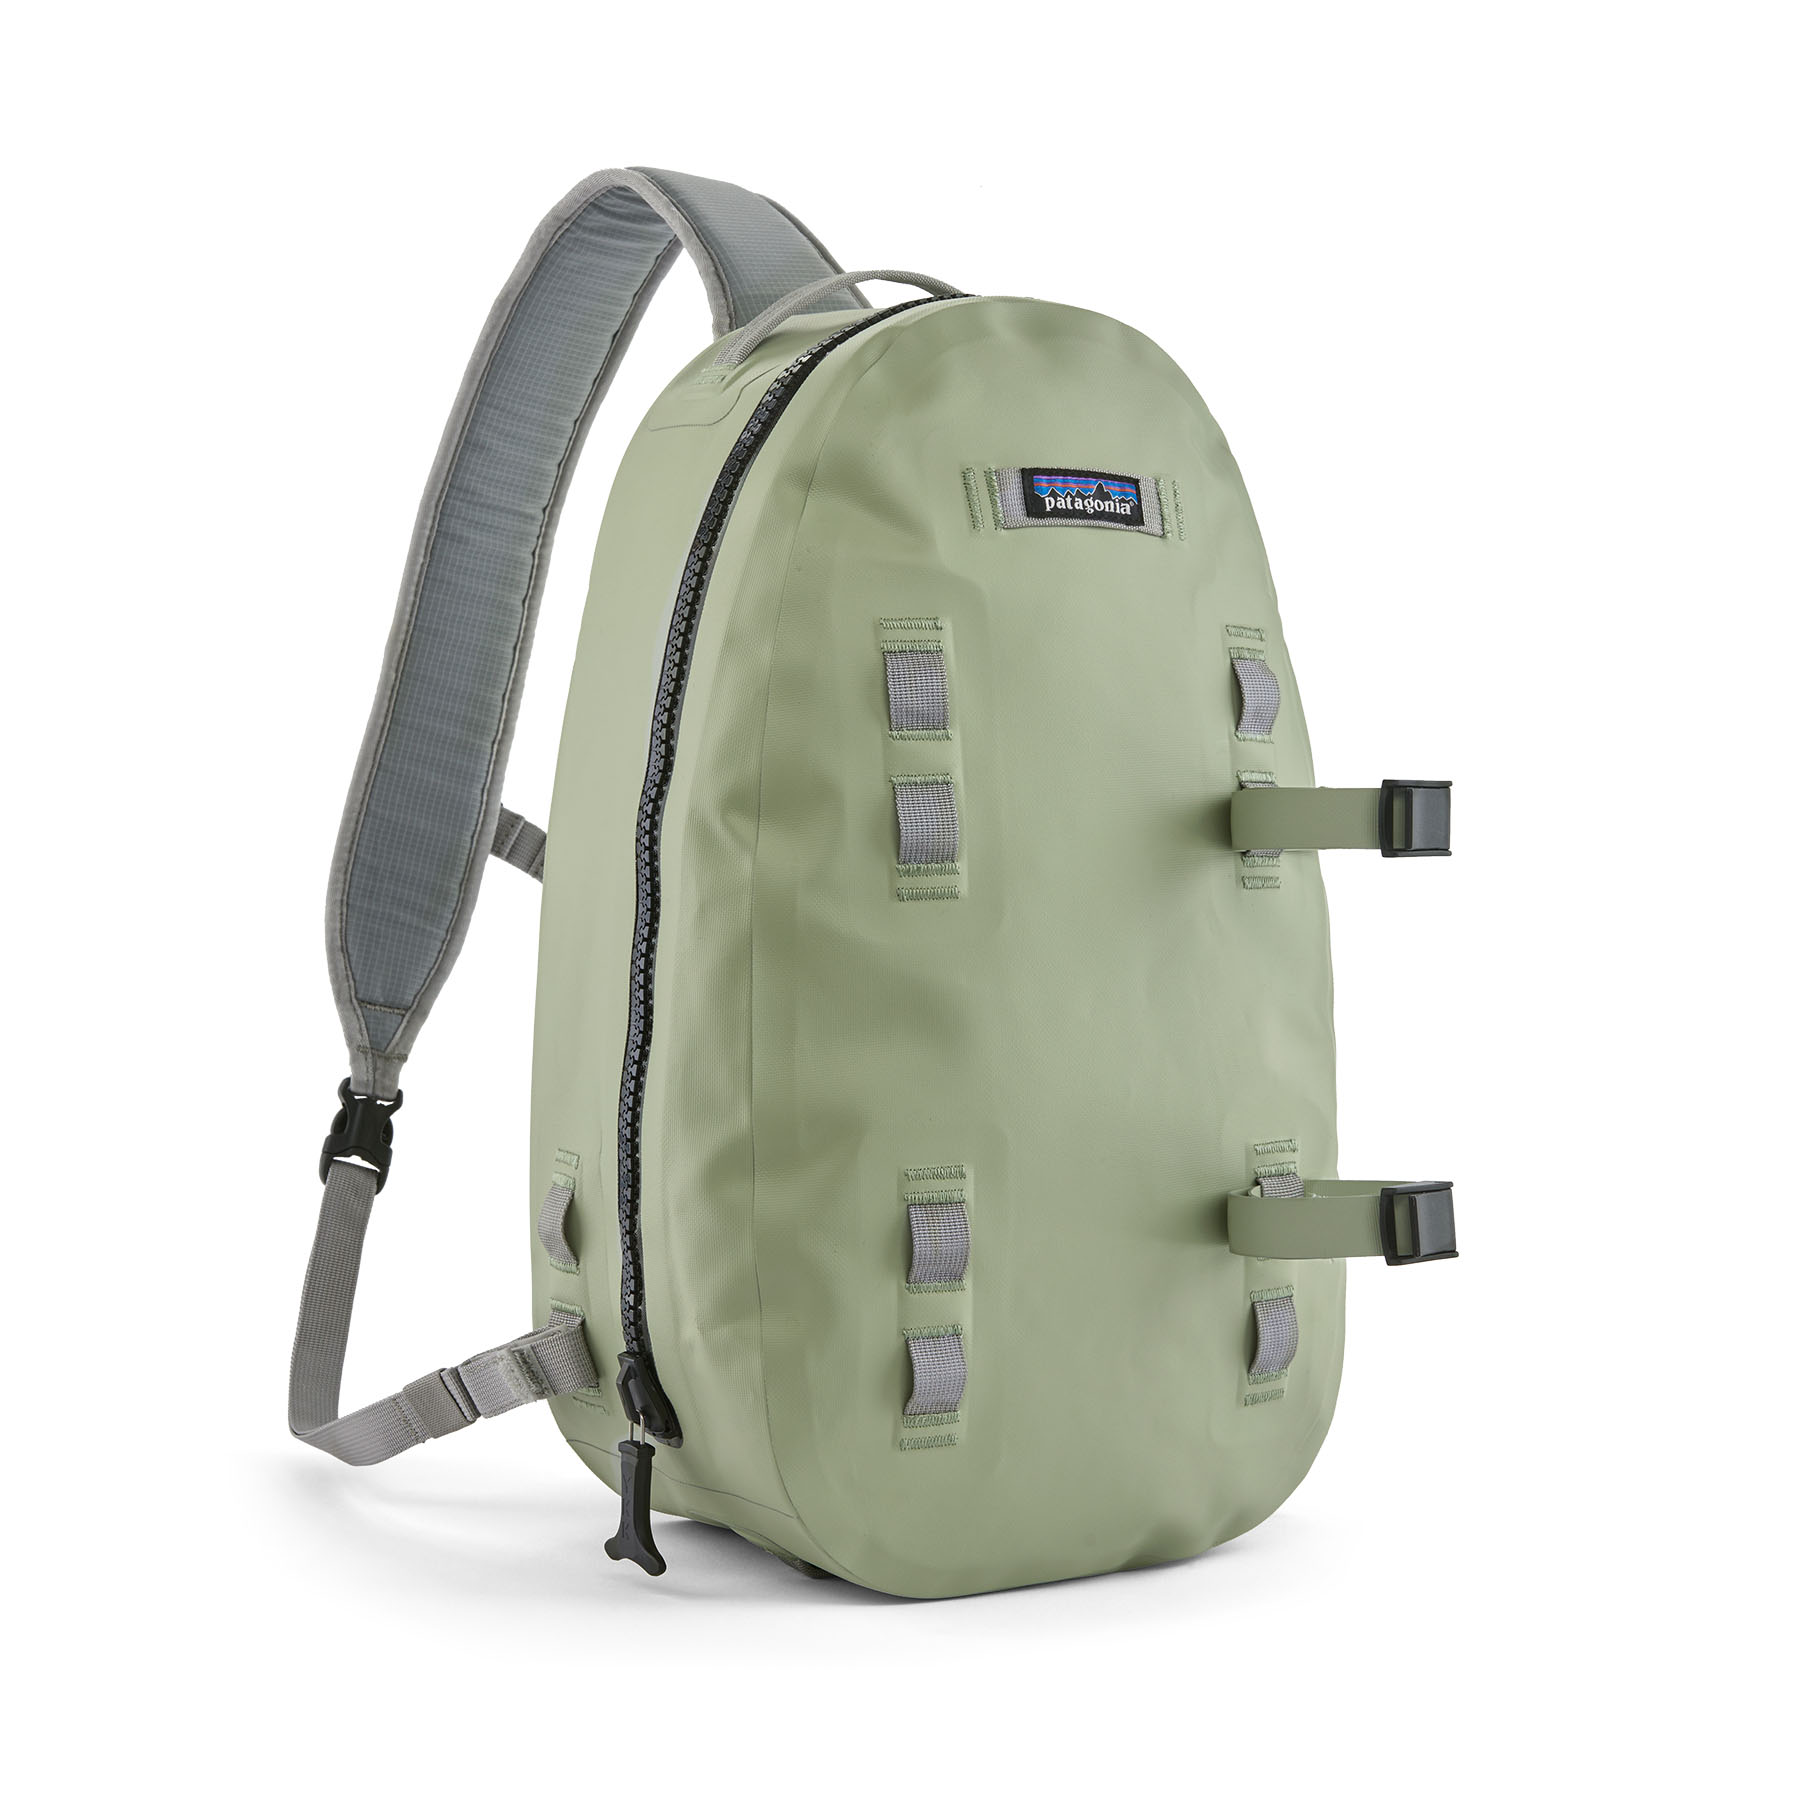 Guidewater Sling 15L (salvia green)